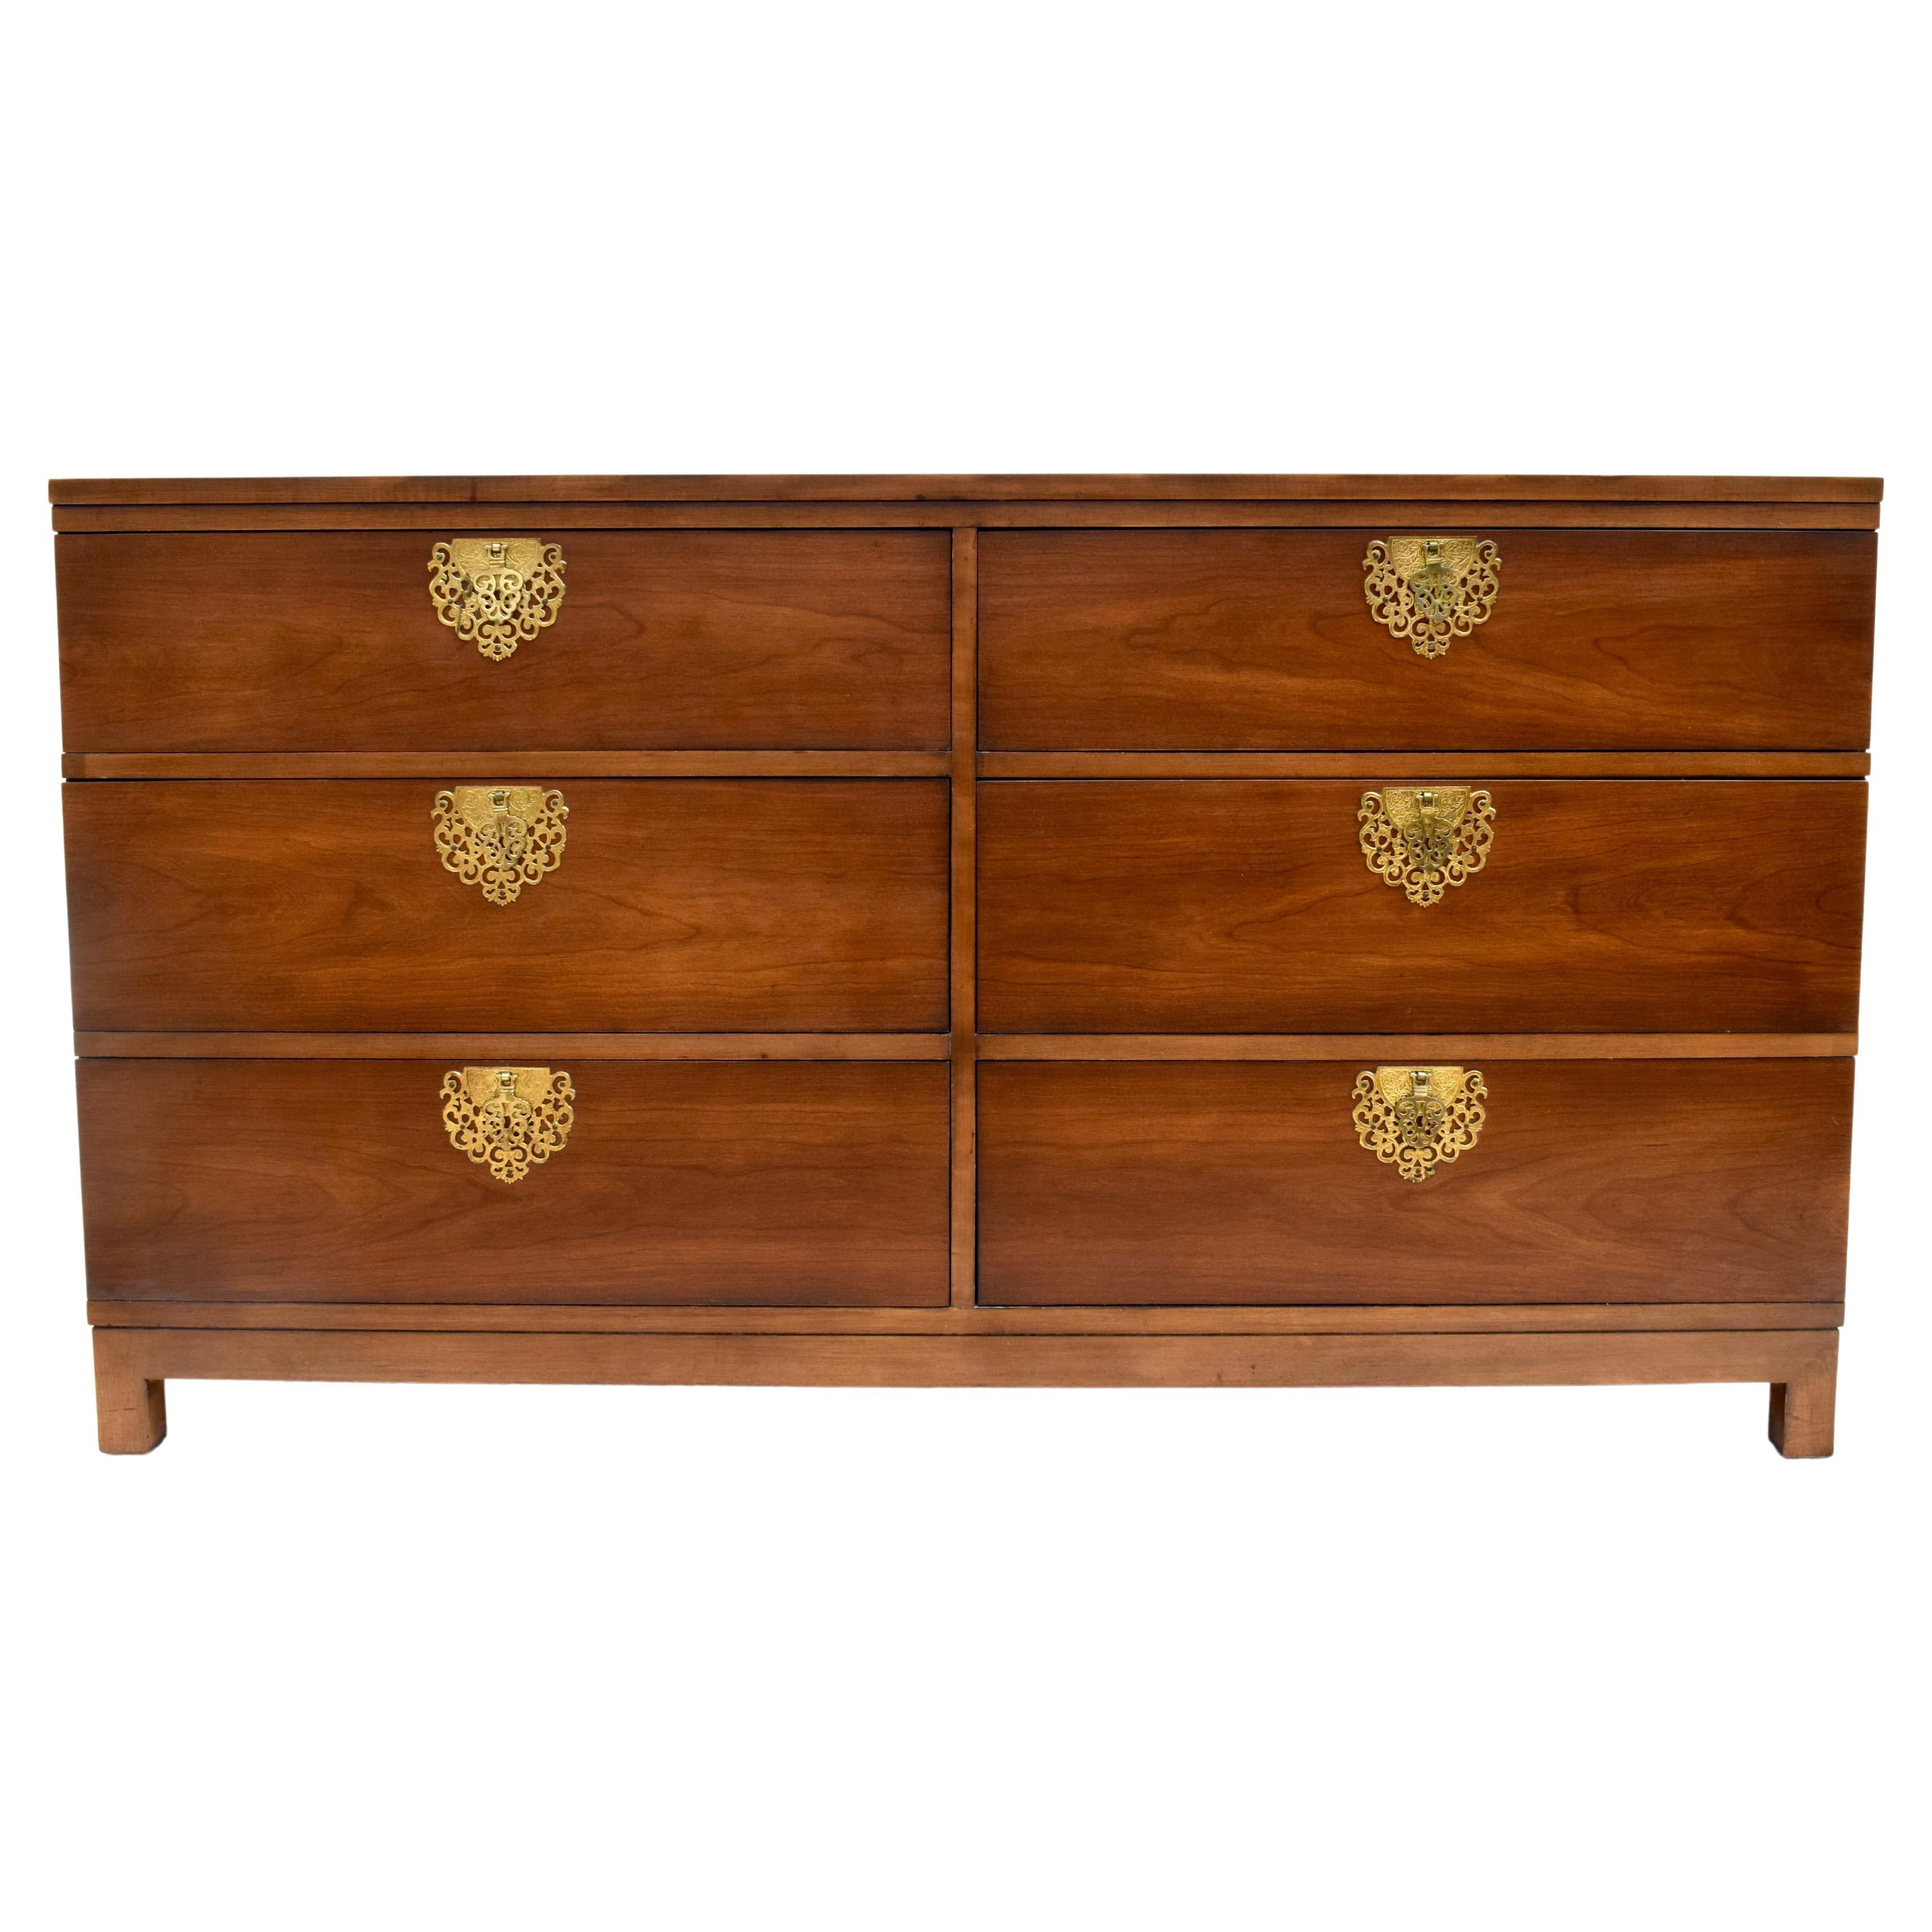 Campaign Chinoiserie Style Dresser by Drexel Heritage